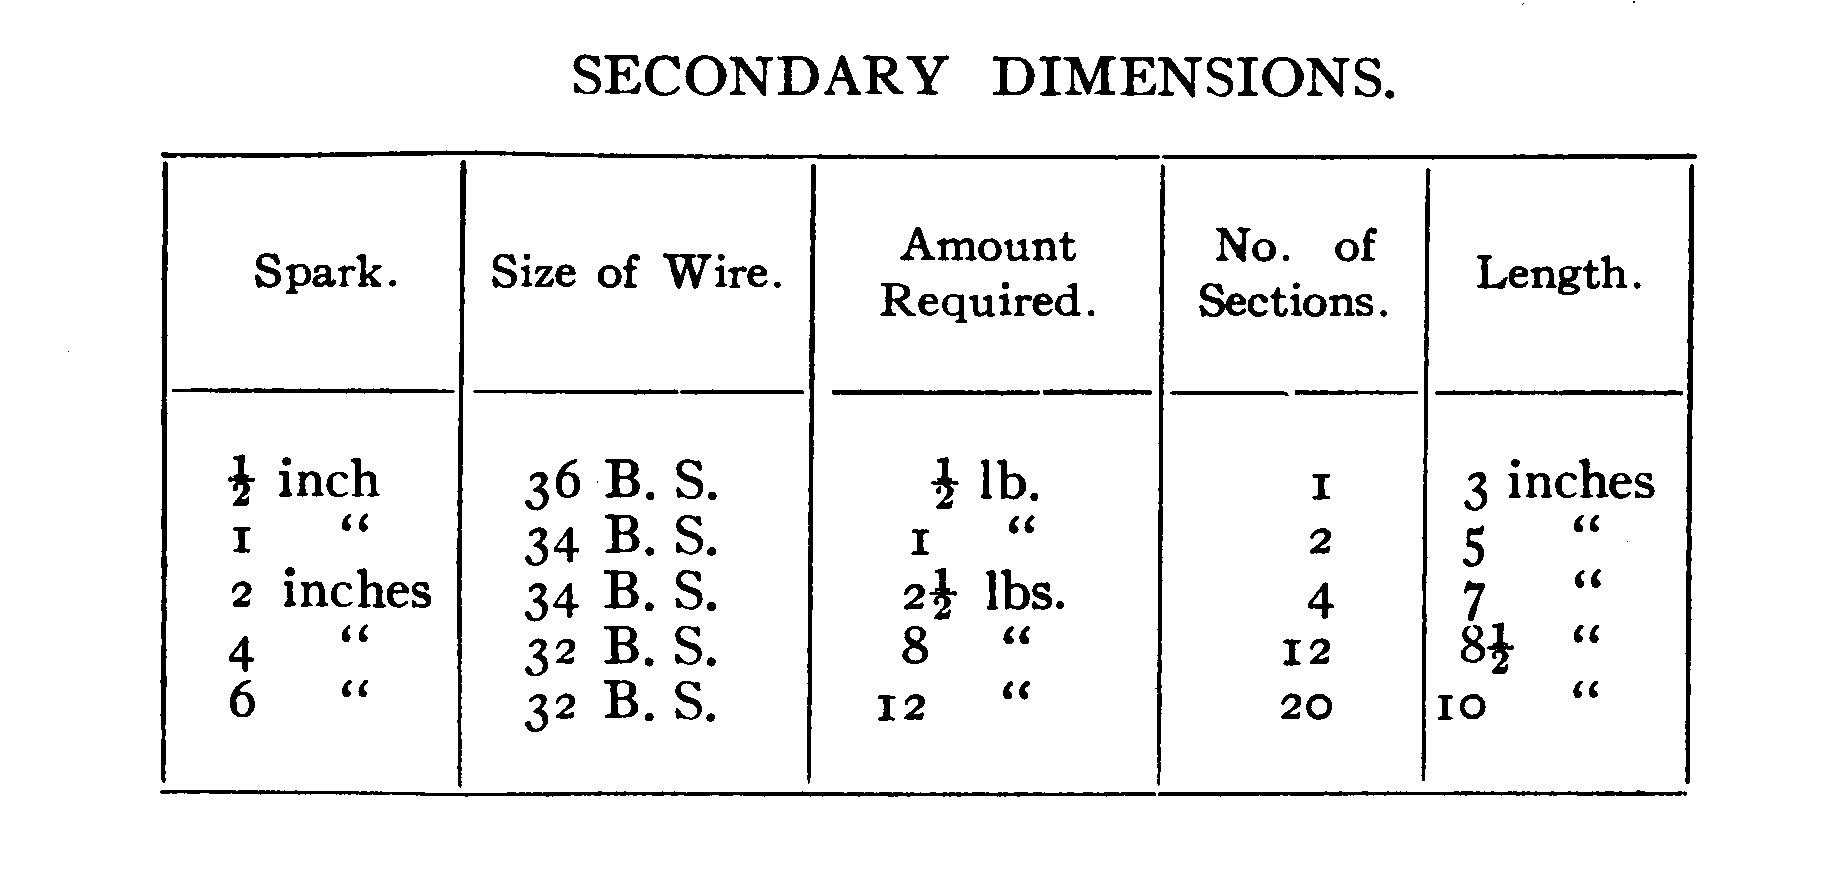 SECONDARY DIMENSIONS TABLE.